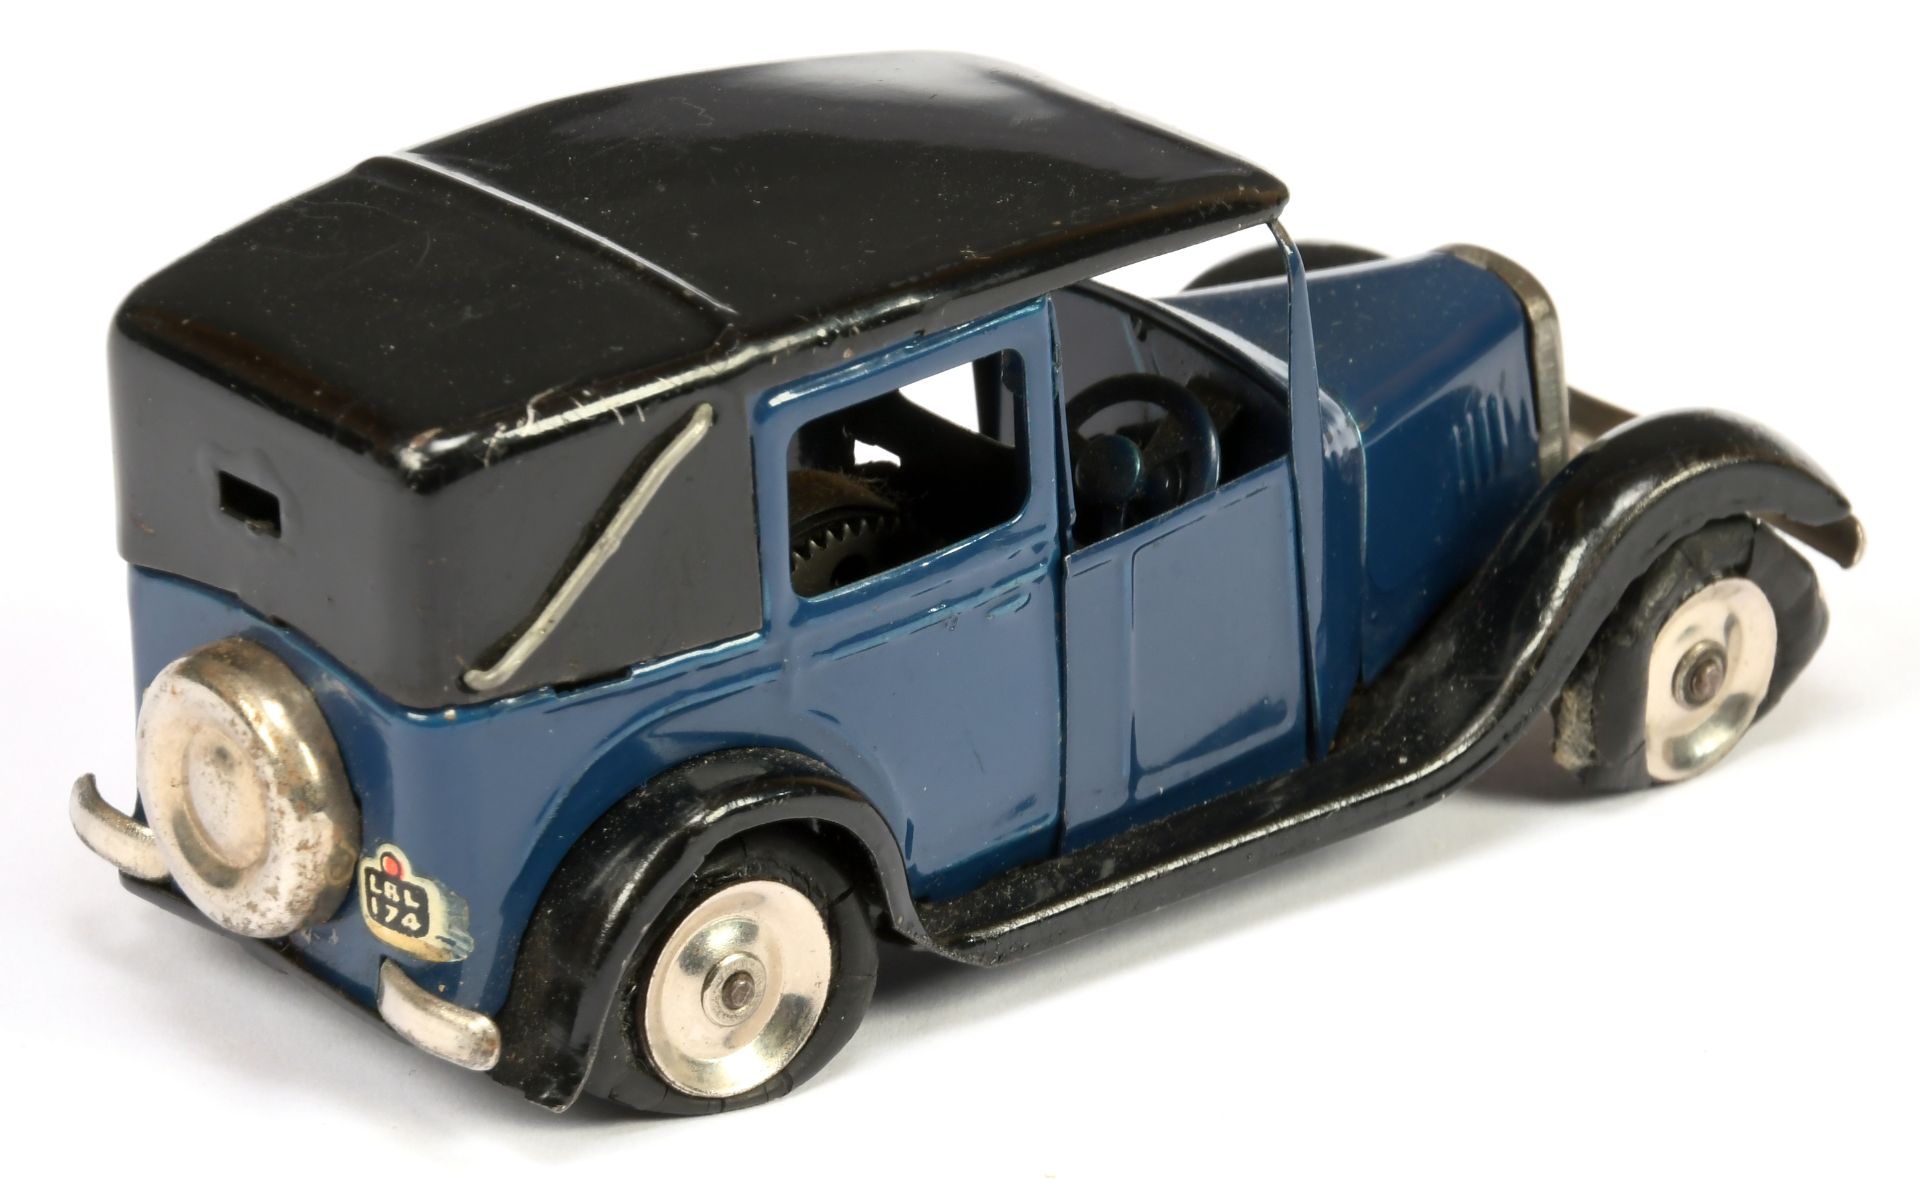 Triang Minic Clockwork 35M "Taxi" - Blue body with black roof and chassis - Image 2 of 2